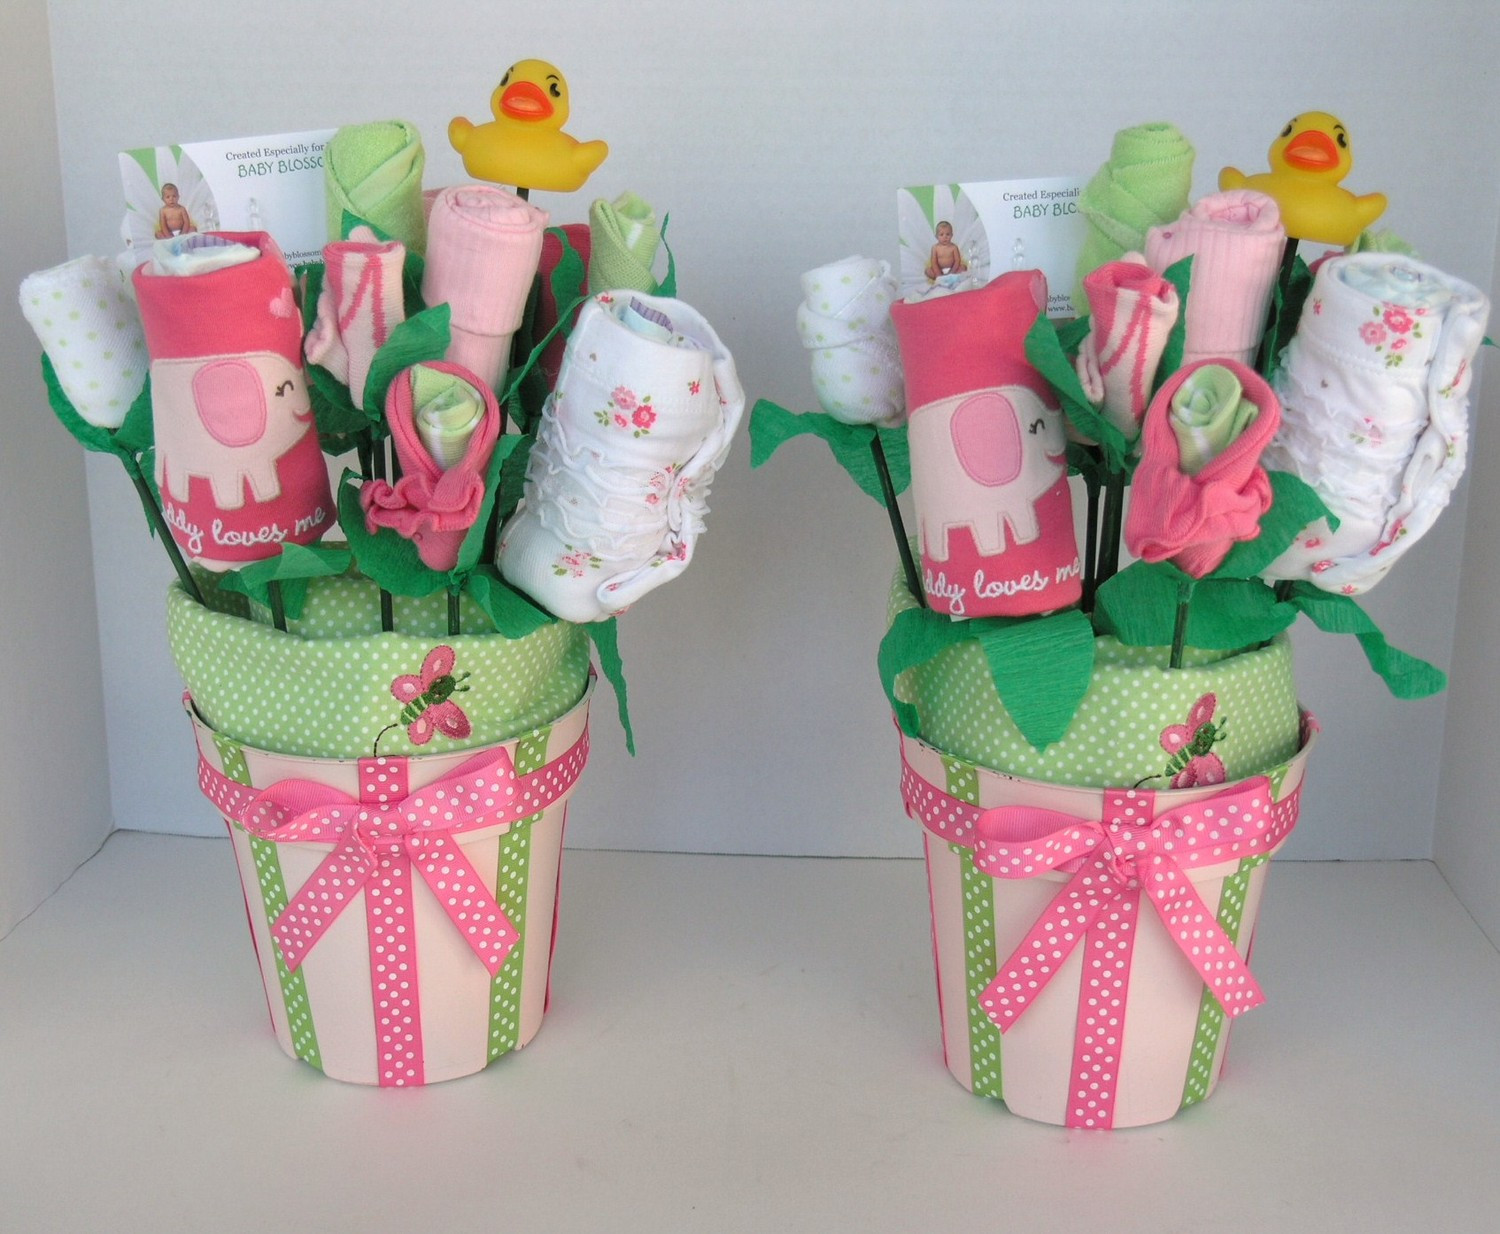 Homemade Gift Ideas For Girls
 Five Best DIY Baby Gifting Ideas for The Little Special